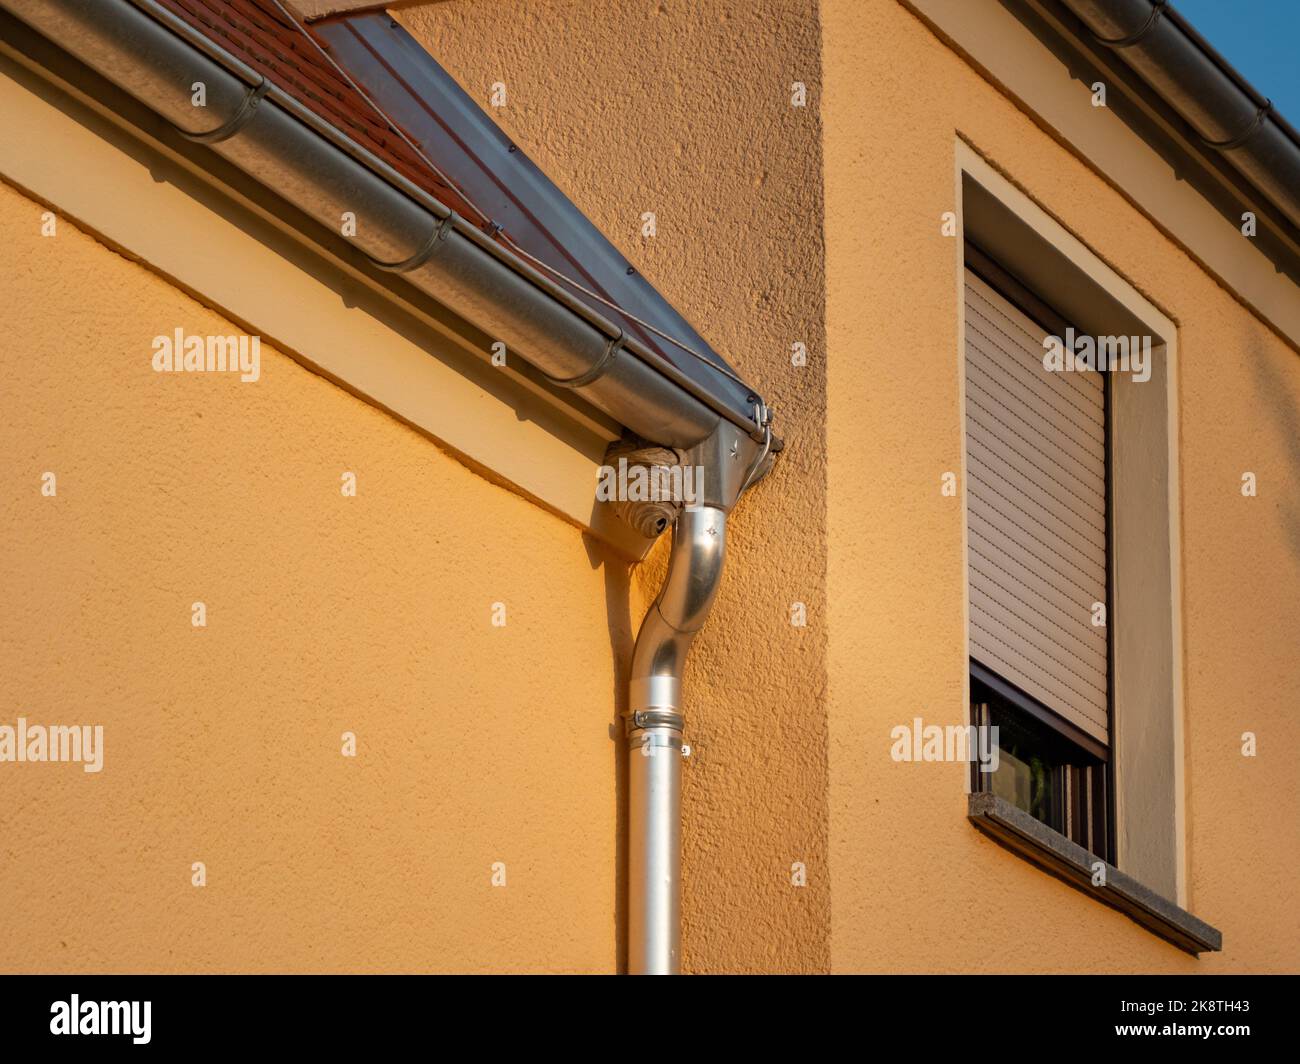 Wasp nest on a building exterior. The grey nest is hanging next to the roof gutter of a residential house. Destroying the insect home is dangerous. Stock Photo